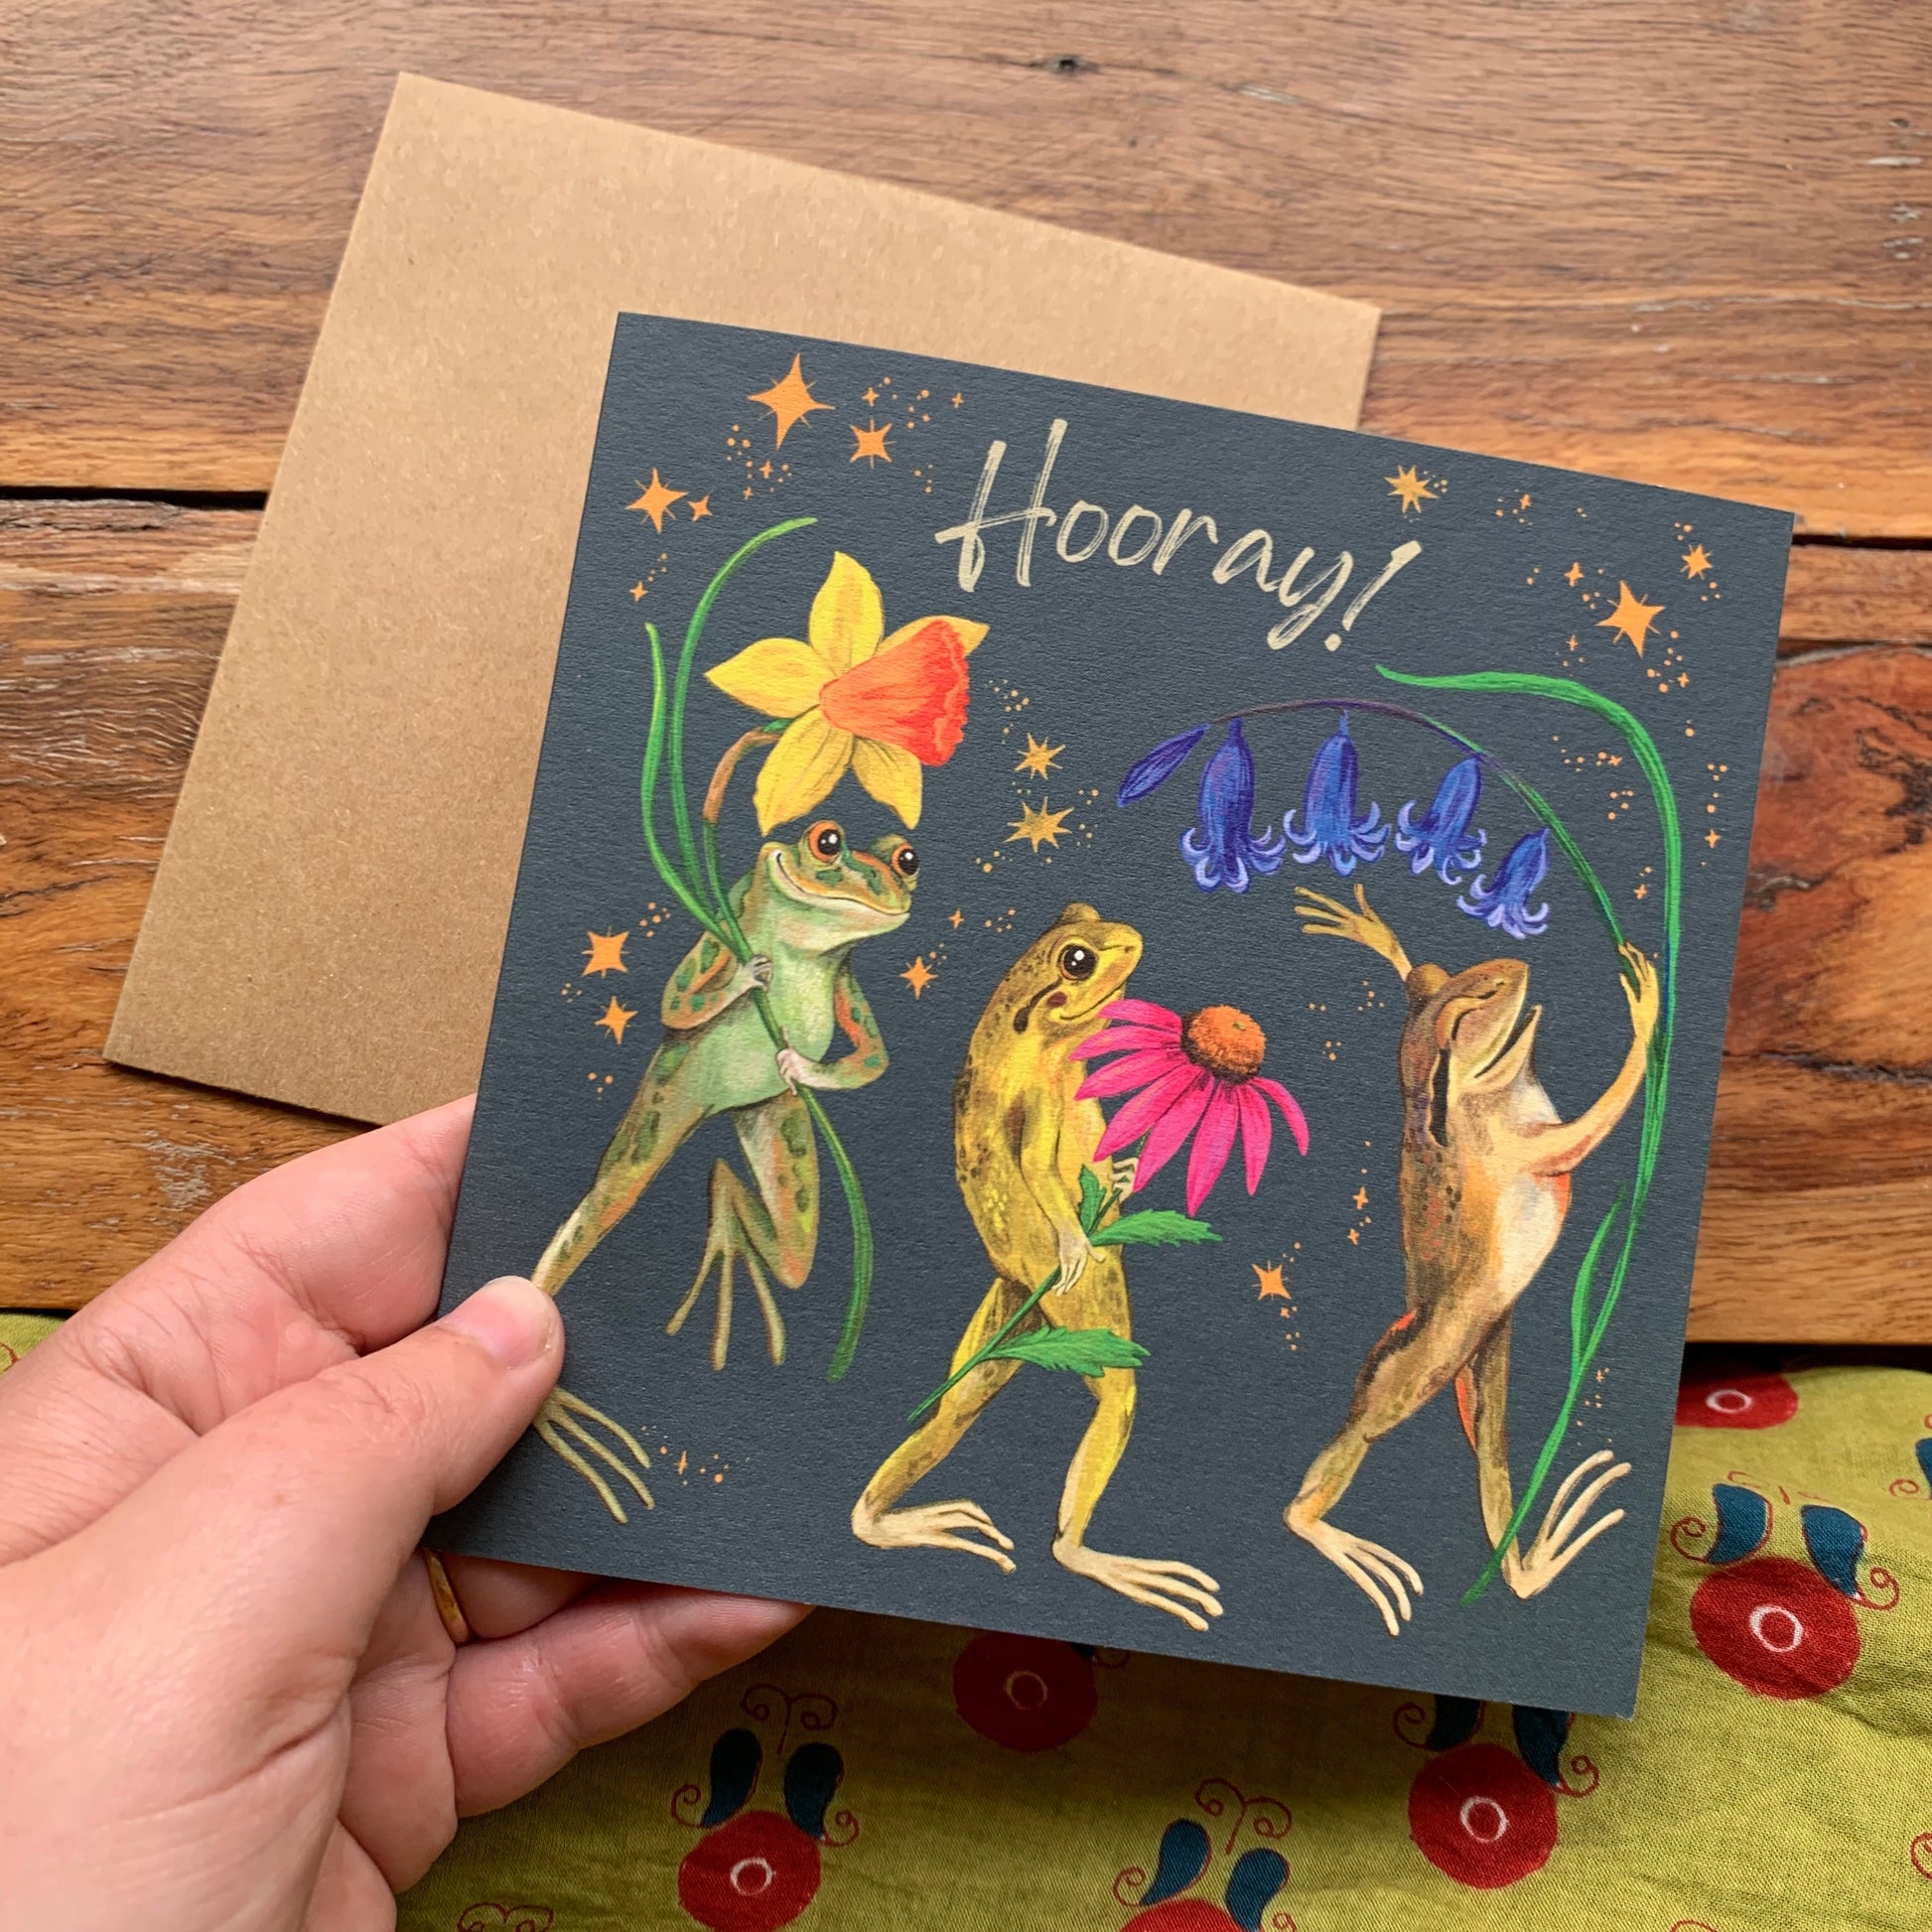 Anna Seed Art | Occasion Card - Hooray! Cute frog illustration